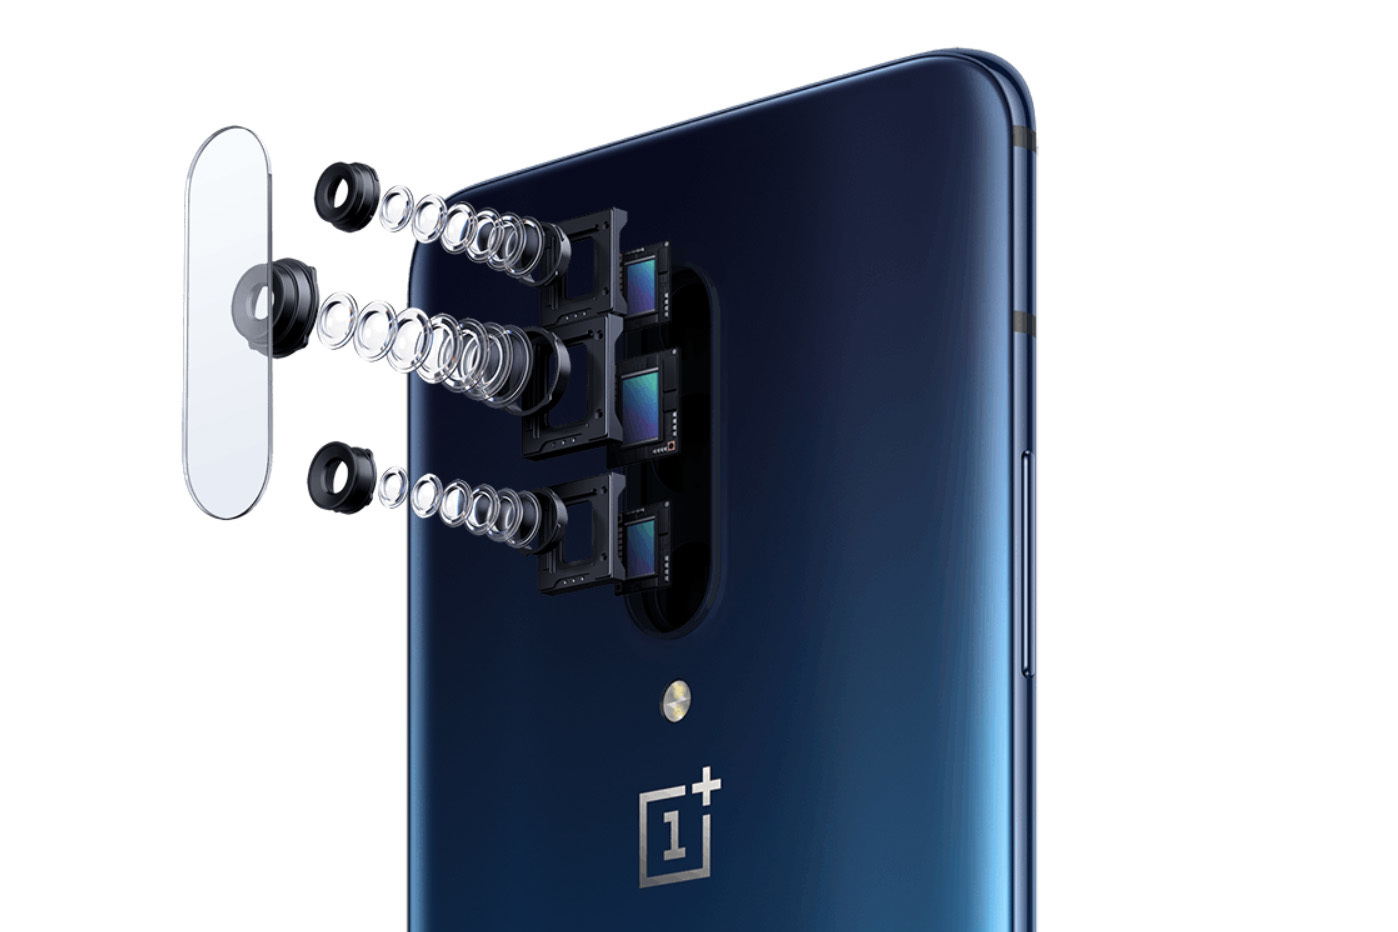 New OnePlus 7 Pro delivers innovation